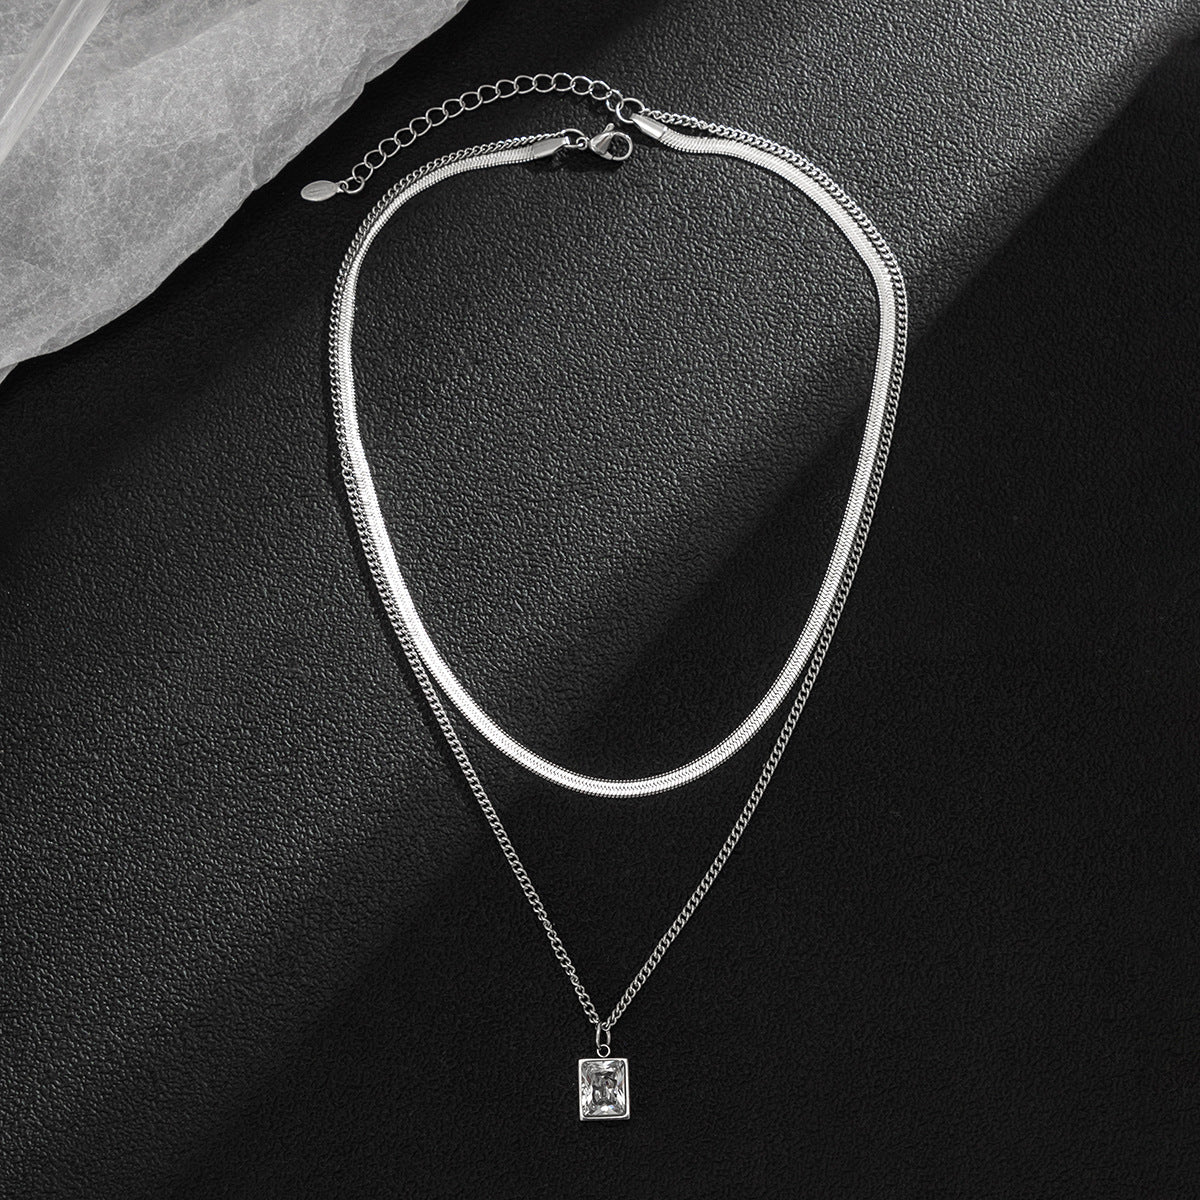 Get set with a square diamond snake chain and light luxury herringbone necklace